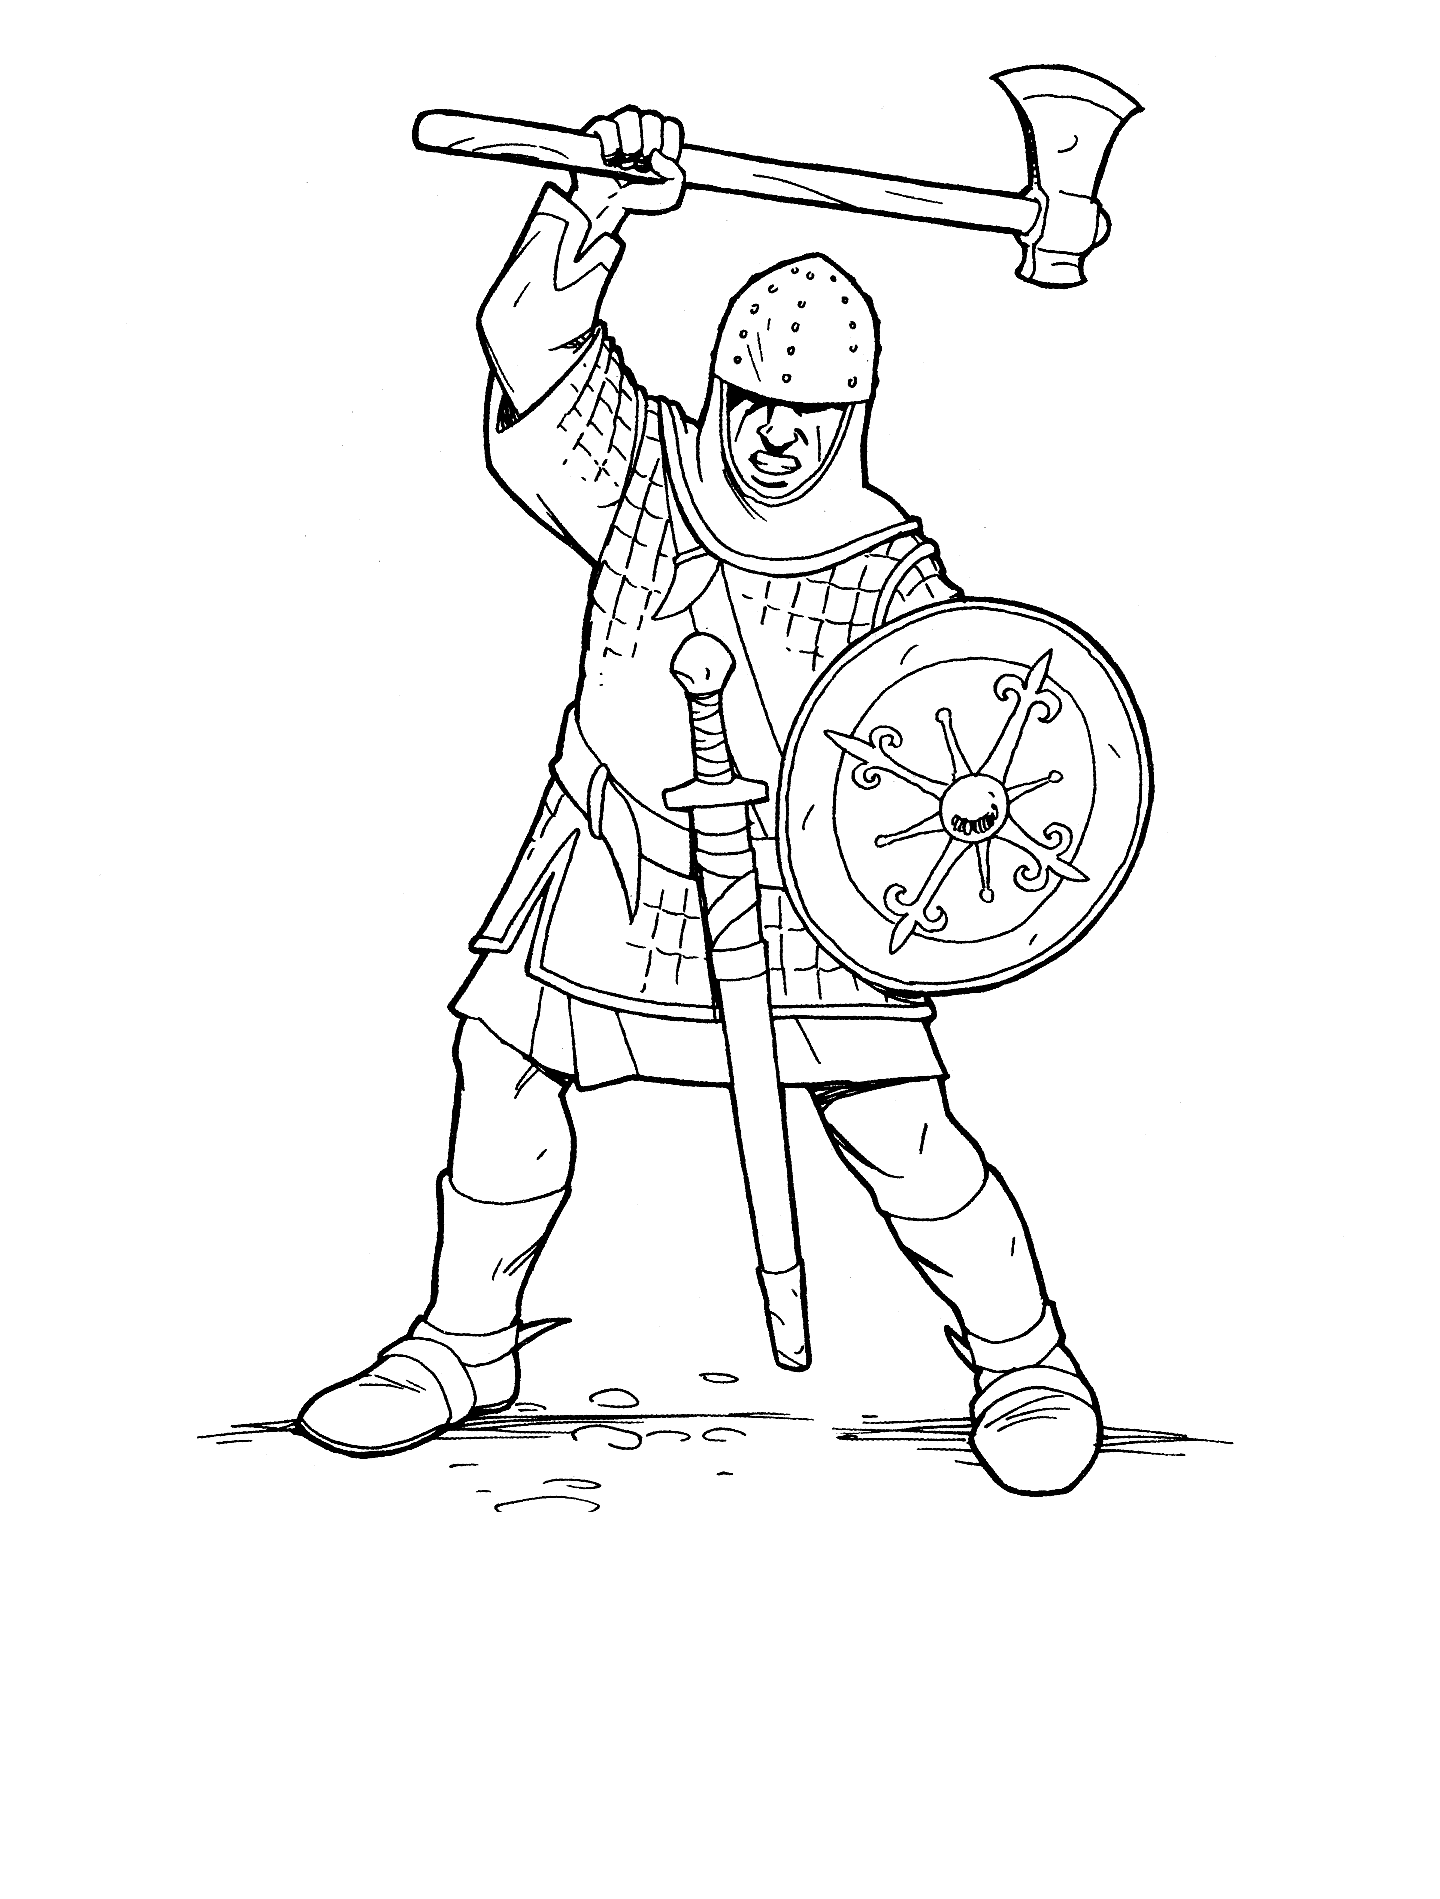 soldier coloring page soldier coloring pages to download and print for free soldier coloring page 1 1